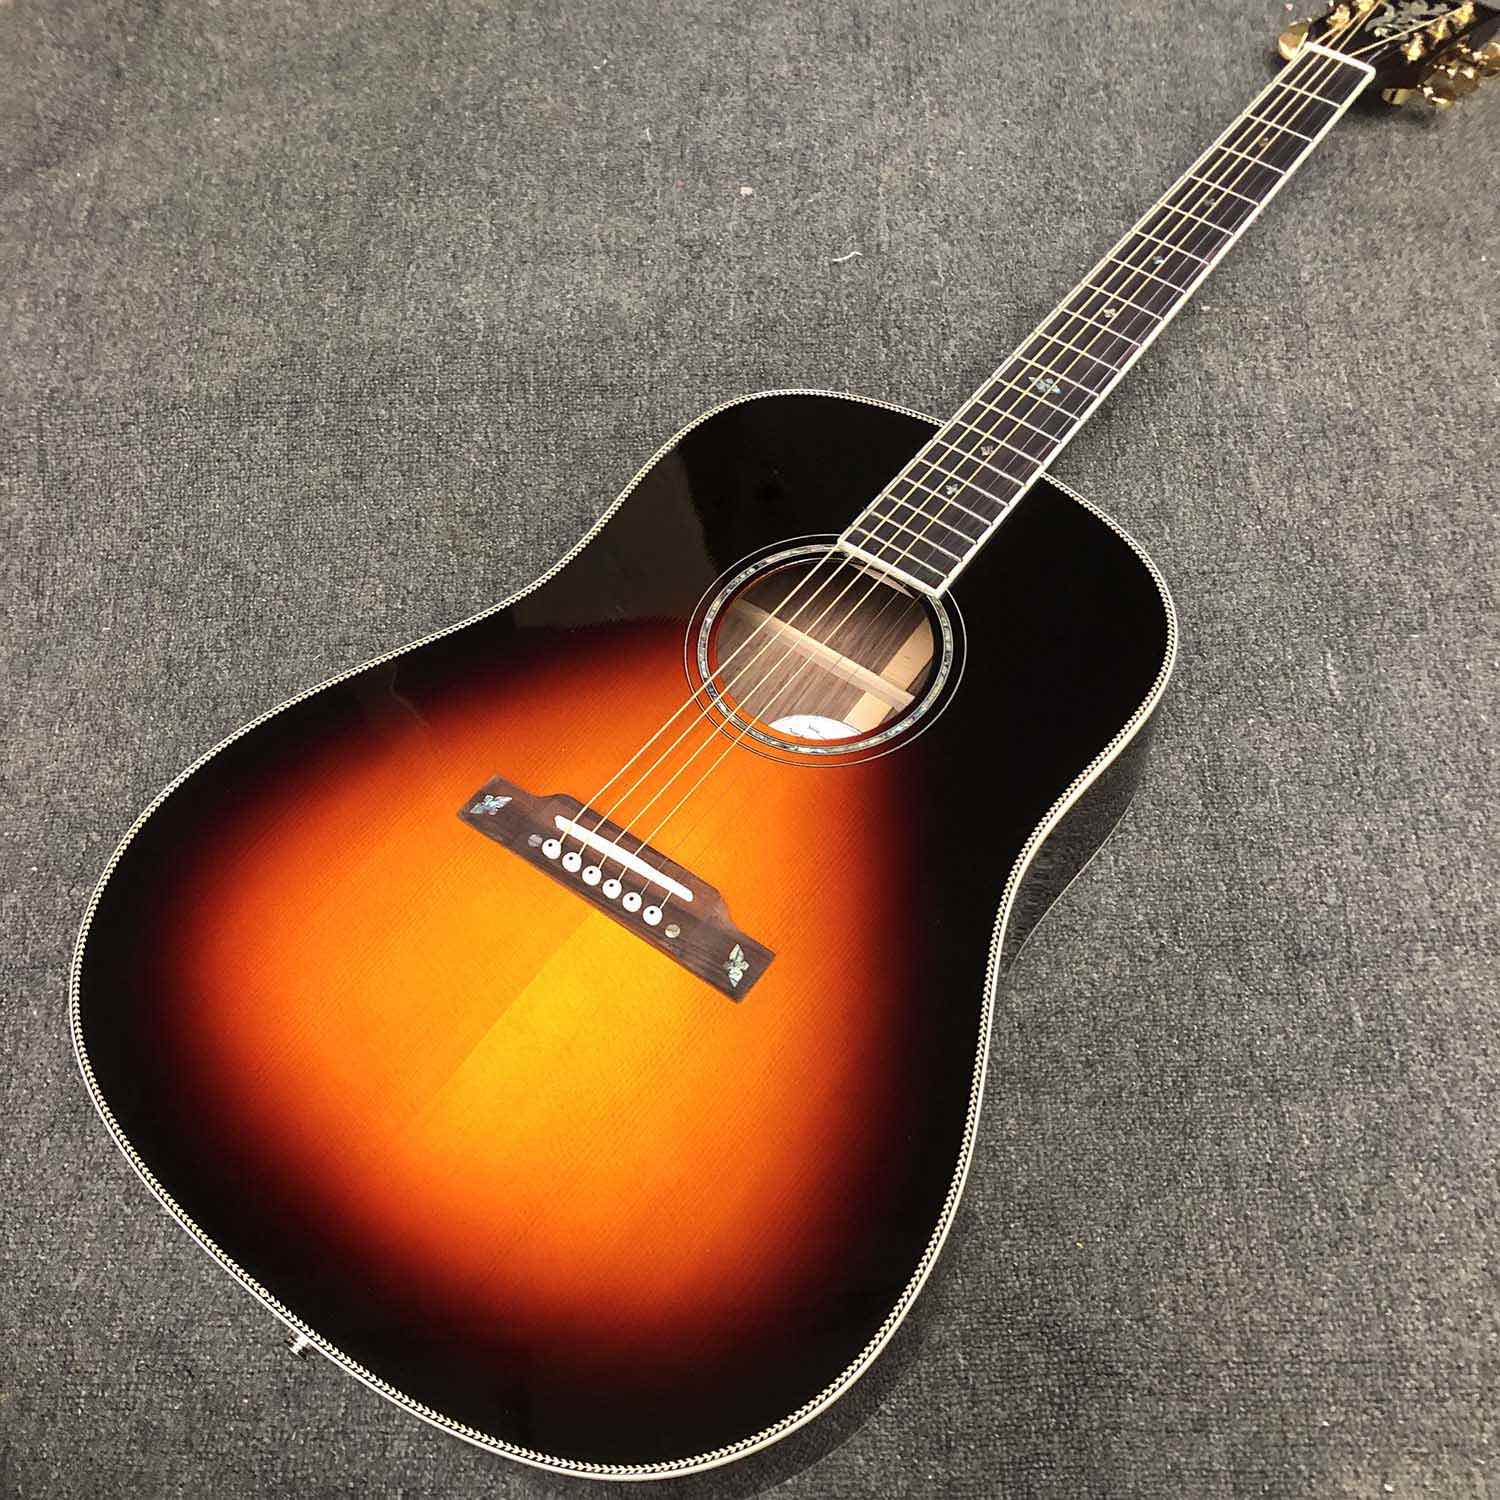 Custom J45 Solid Spruce Wood Top Acoustic Guitar with Fishbone Binding in Sunburst Color